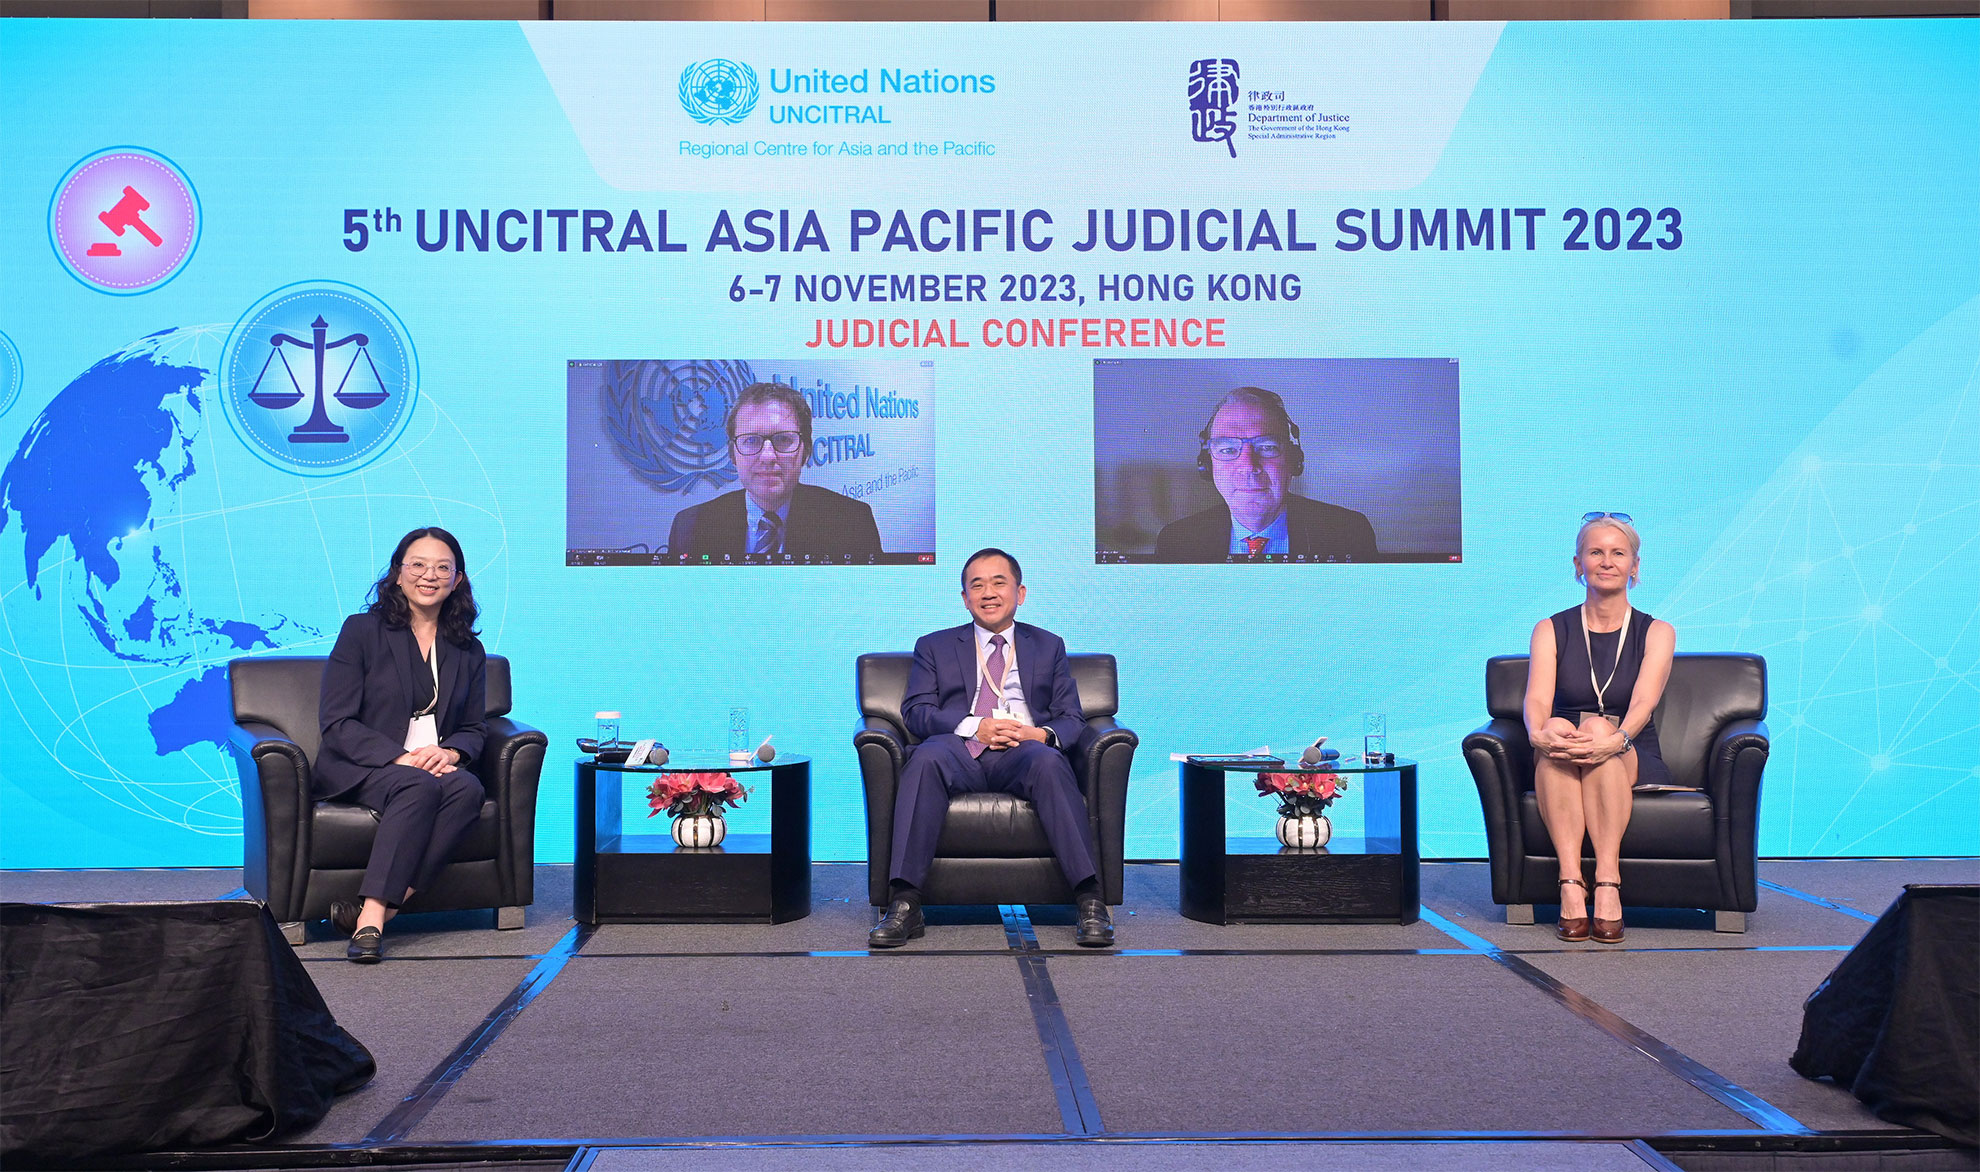 The five-day Hong Kong Legal Week 2023, an annual flagship event of the legal sector and the Department of Justice, themed "Onward & Forward: Connecting the World" began today (November 6). Photo shows (from left) the Head of the United Nations Commission on International Trade Law (UNCITRAL) Regional Centre for Asia and the Pacific, Ms Athita Komindr; Legal Officer of UNCITRAL Mr Alexander William Kunzelmann (left on screen); the Permanent Secretary of the Ministry of Digital Economy and Society of Thailand, Professor Wisit Wisitsora-at; Academic of TC Beirne School of Law of the University of Queensland, Australia, Dr Alan Davidson (right on screen); and Assistant Professor of the Chinese University of Hong Kong Dr Eliza Mik at panel session 4 on UNCITRAL's Work on Digital Economy and Trade at the 5th UNCITRAL Asia Pacific Judicial Summit - Judicial Conference.